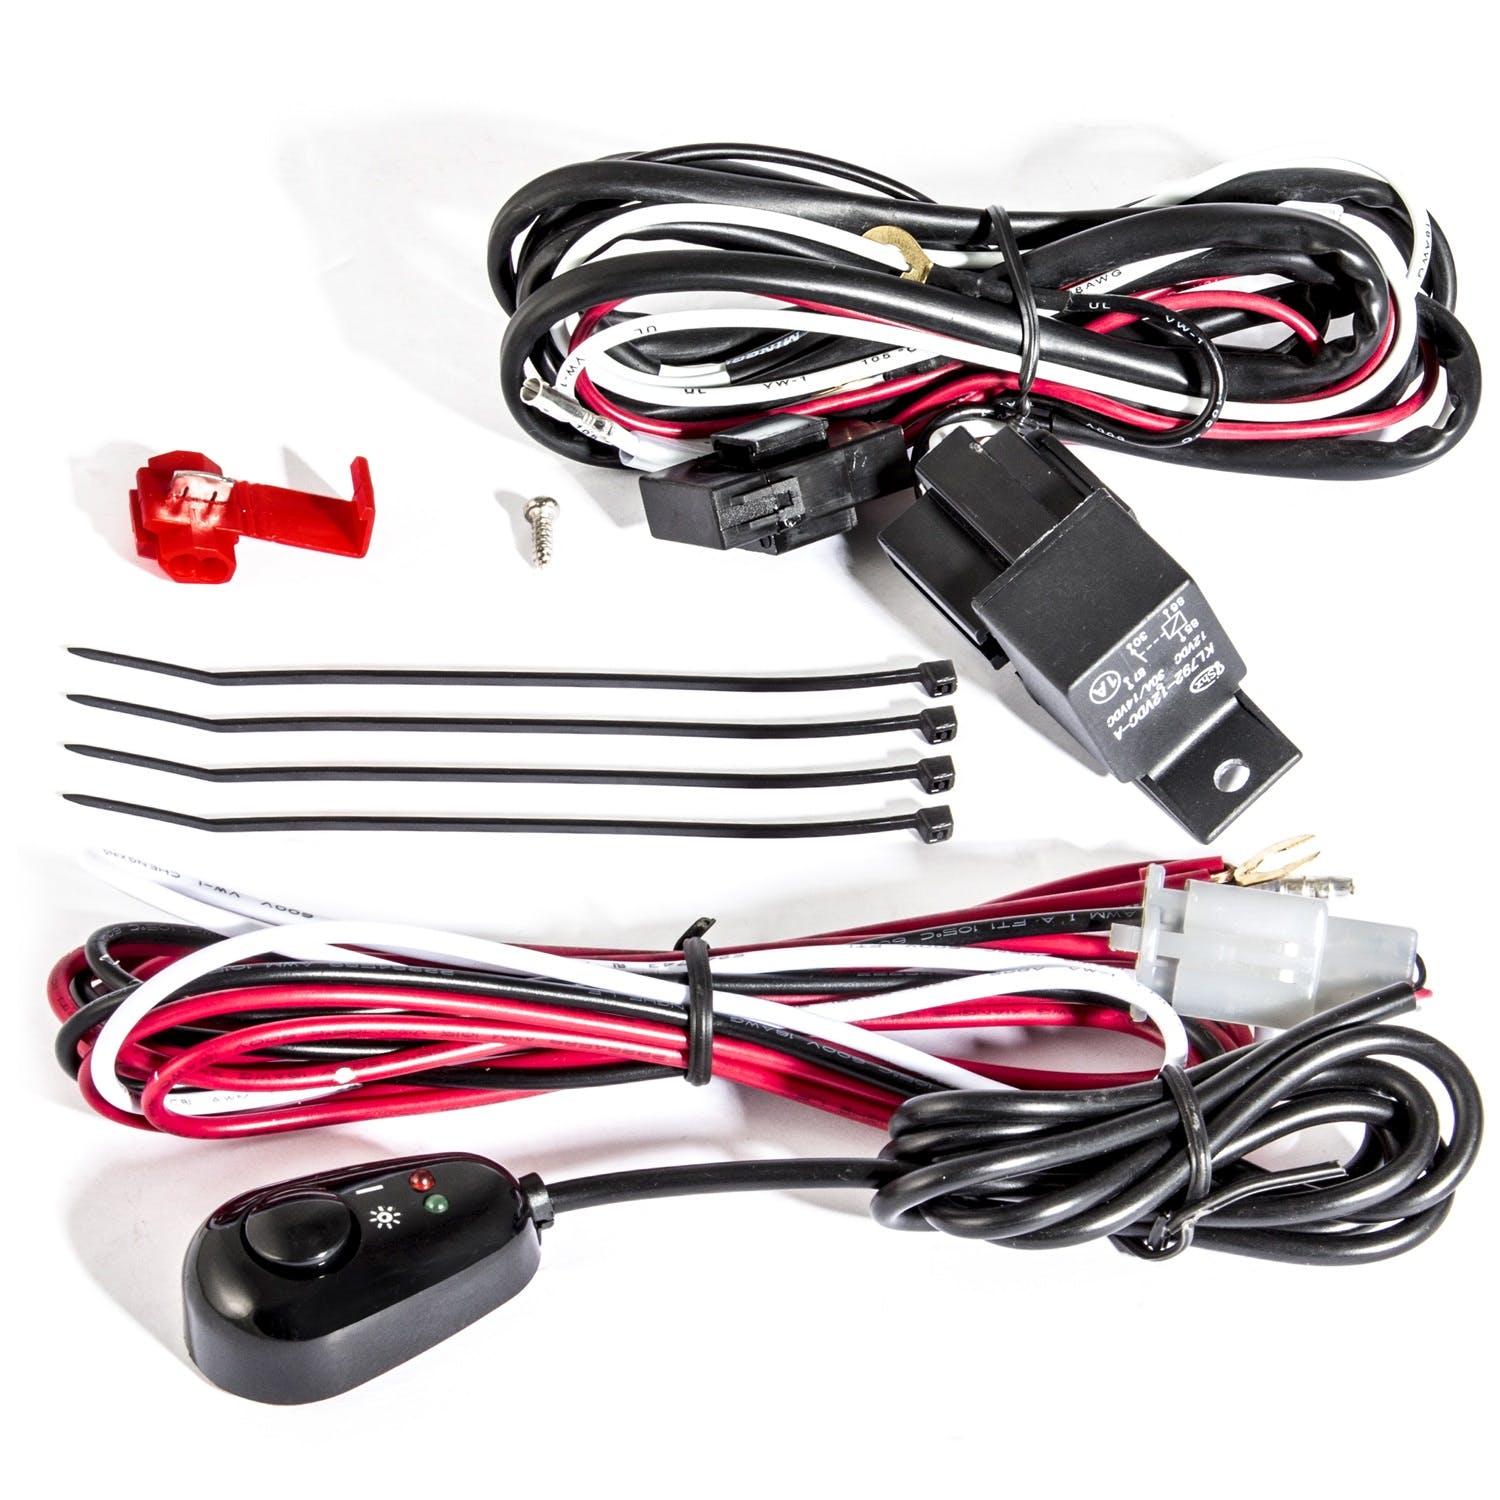 AnzoUSA 851062 12V Auxiliary Wiring Kit with Illuminated Switch